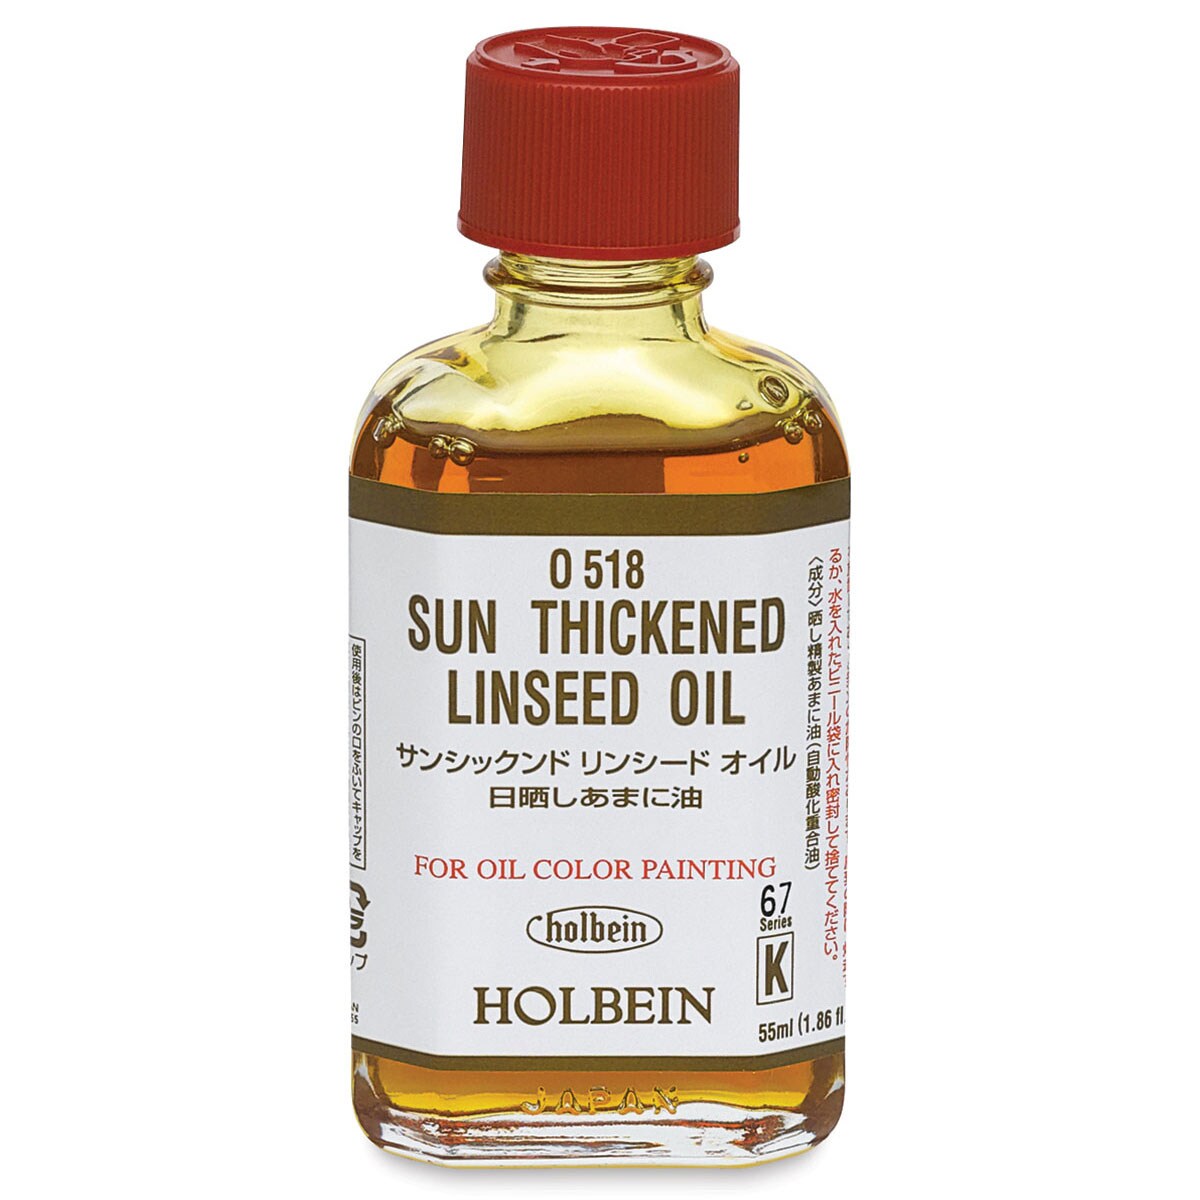 Holbein Sun-Thickened Linseed Oil - 55 ml Bottle